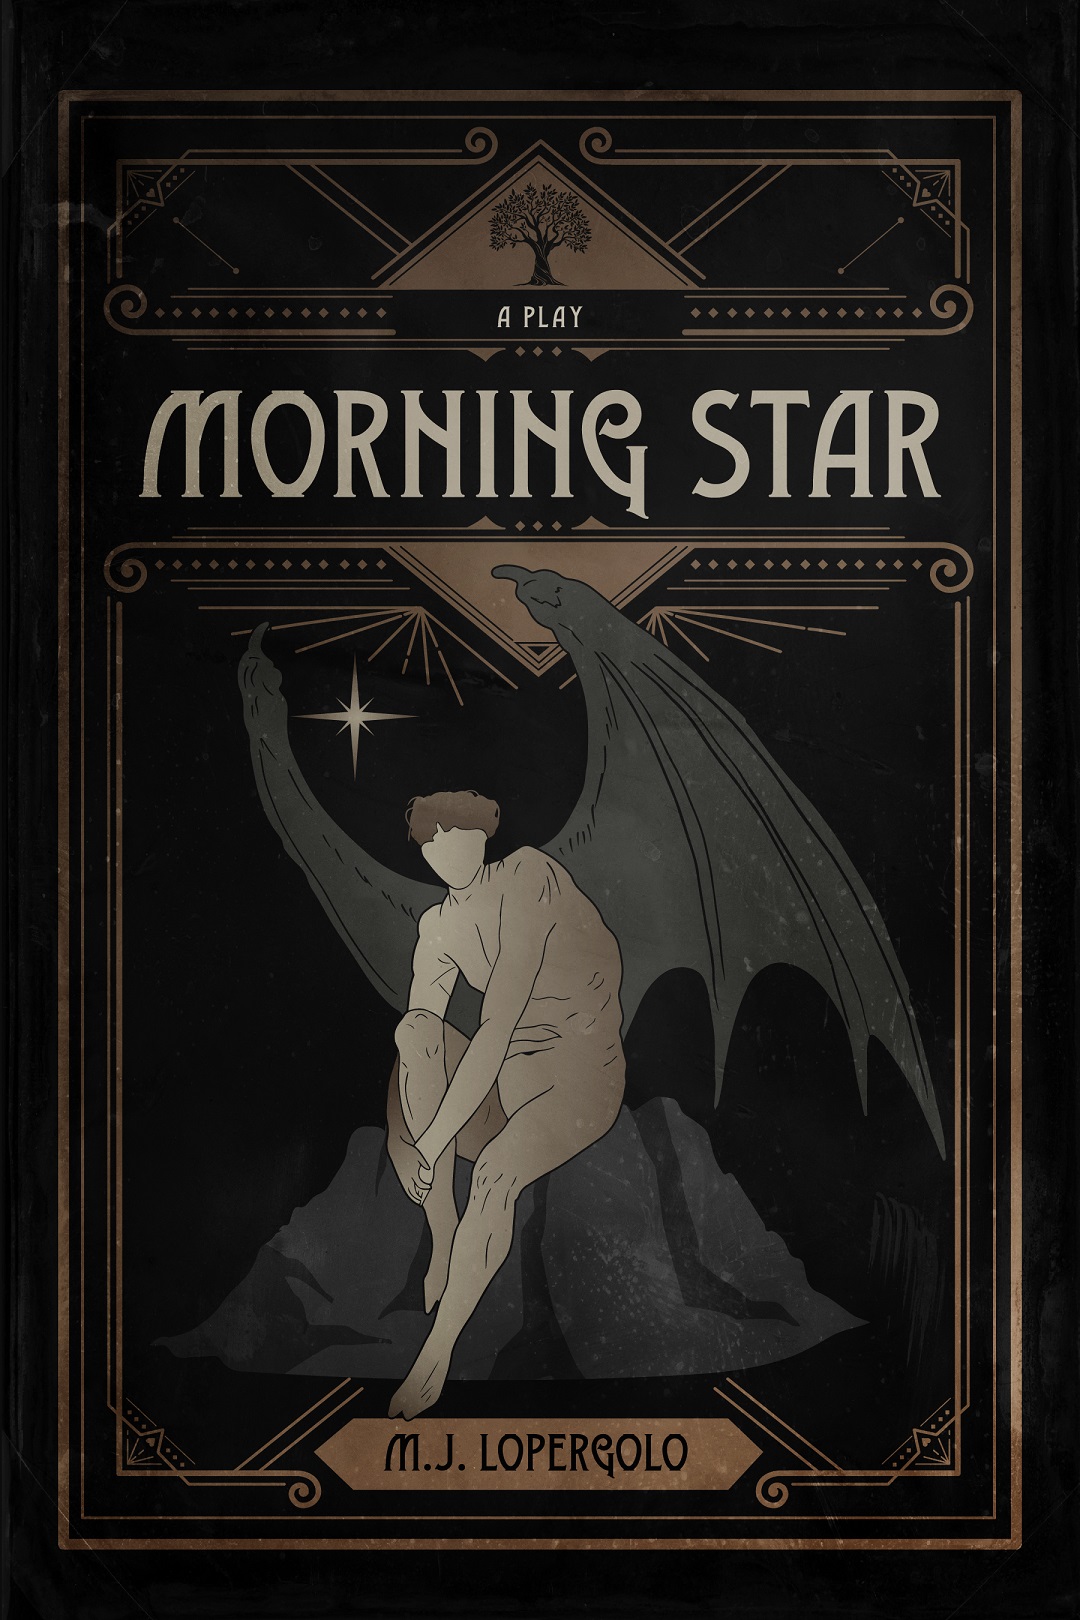 Morning Star: A Play by M.J. Lopergolo – The Best Play to Read in Your Leisure